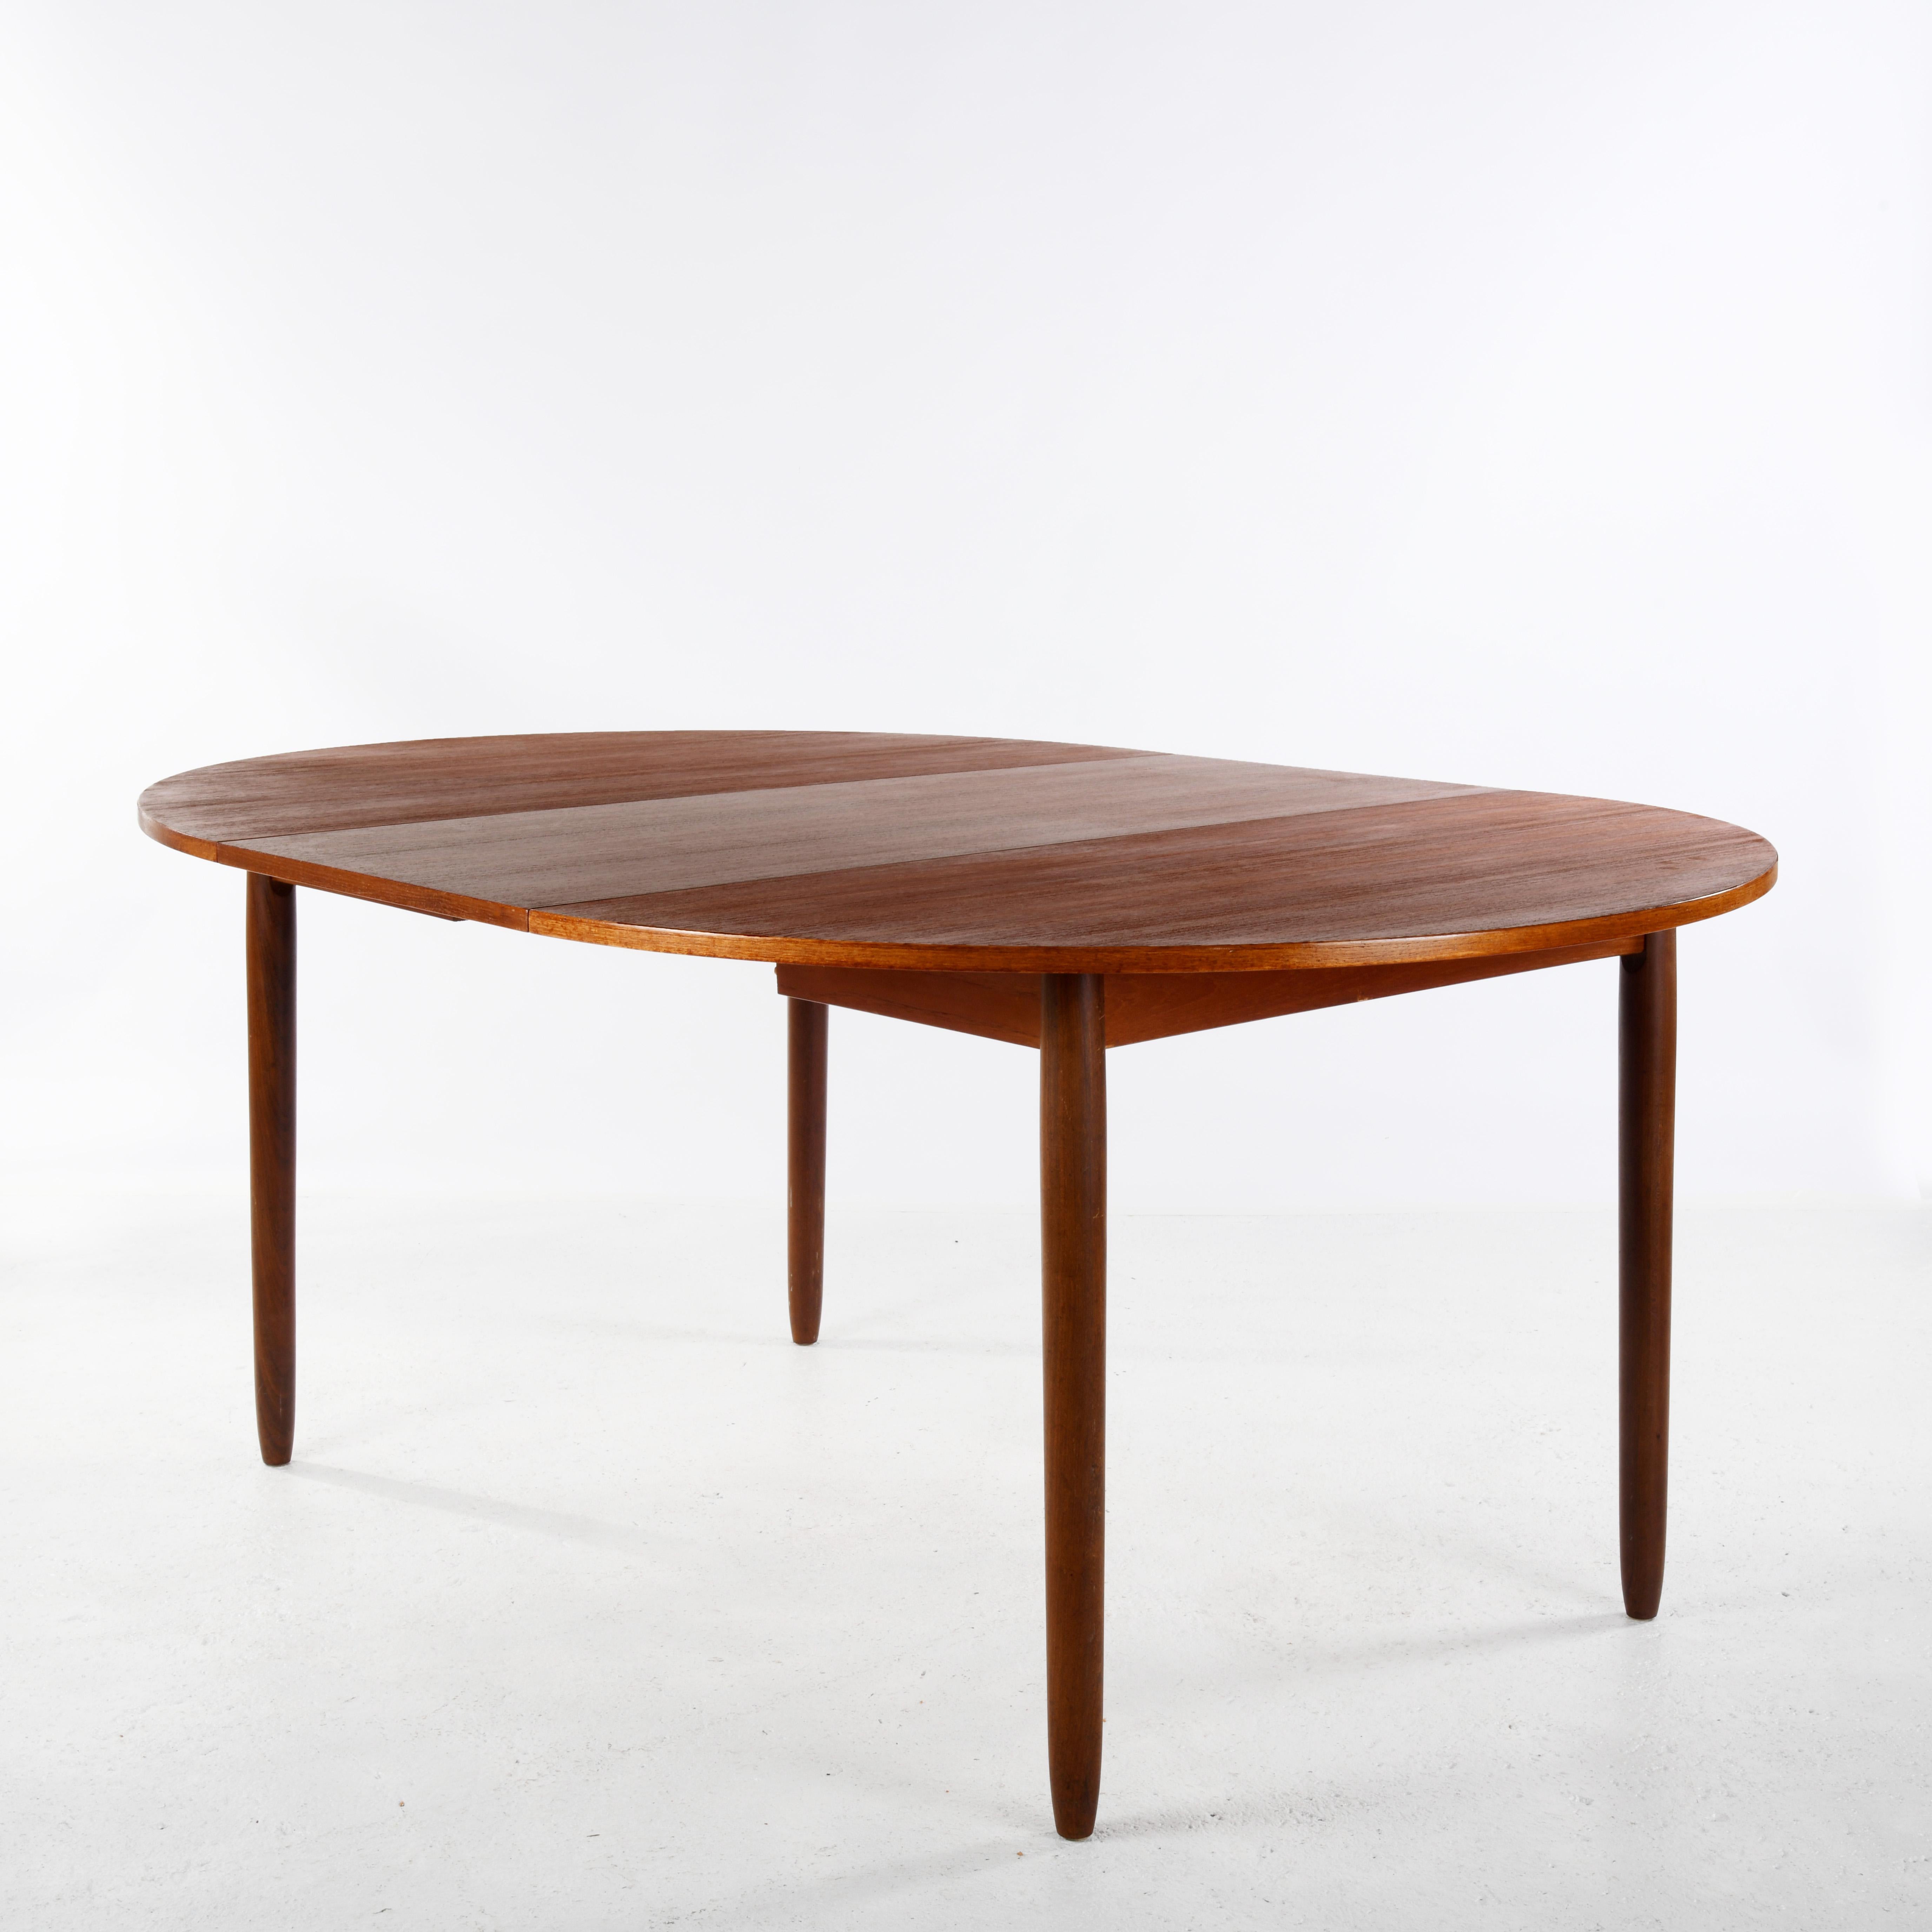 Scandinavian dining table from the 1960s, in teak veneer. The round top can be extended into an oval shape. As always, the extension leaf is a different colour because it has not been exposed to as much sunlight as the rest of the top. The top has